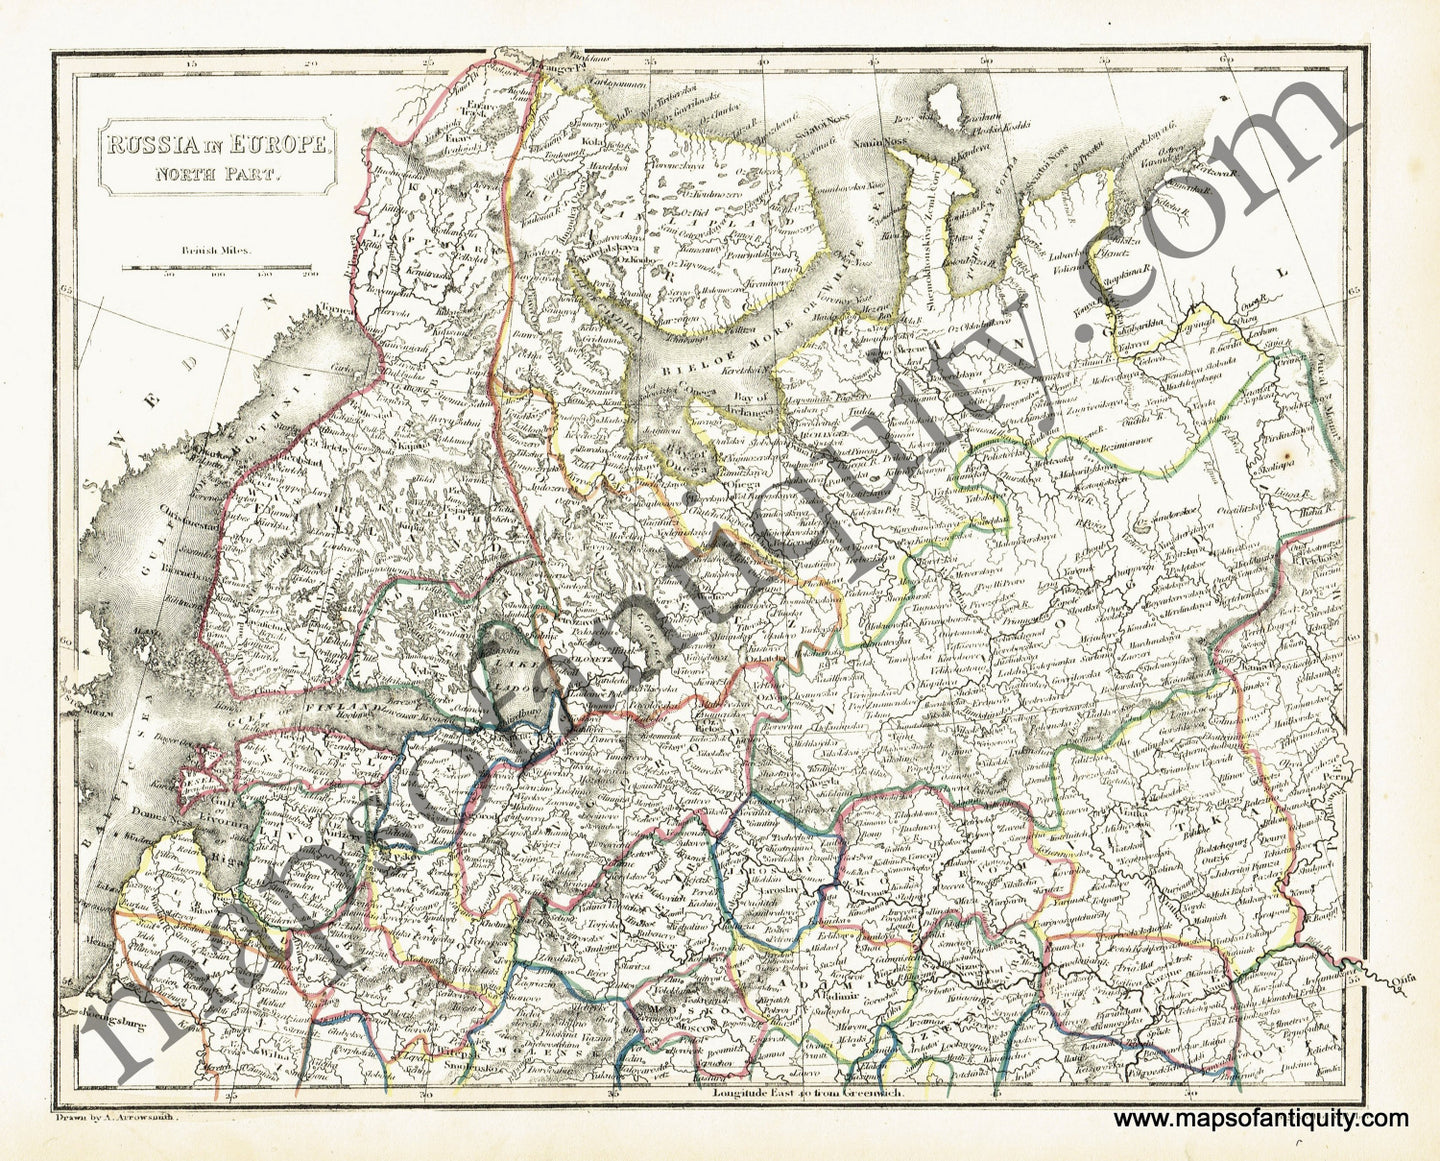 Antique-Hand-Colored-Map-Russia-in-Europe-North-Part-Europe-Russia-1817-Arrowsmith-Maps-Of-Antiquity